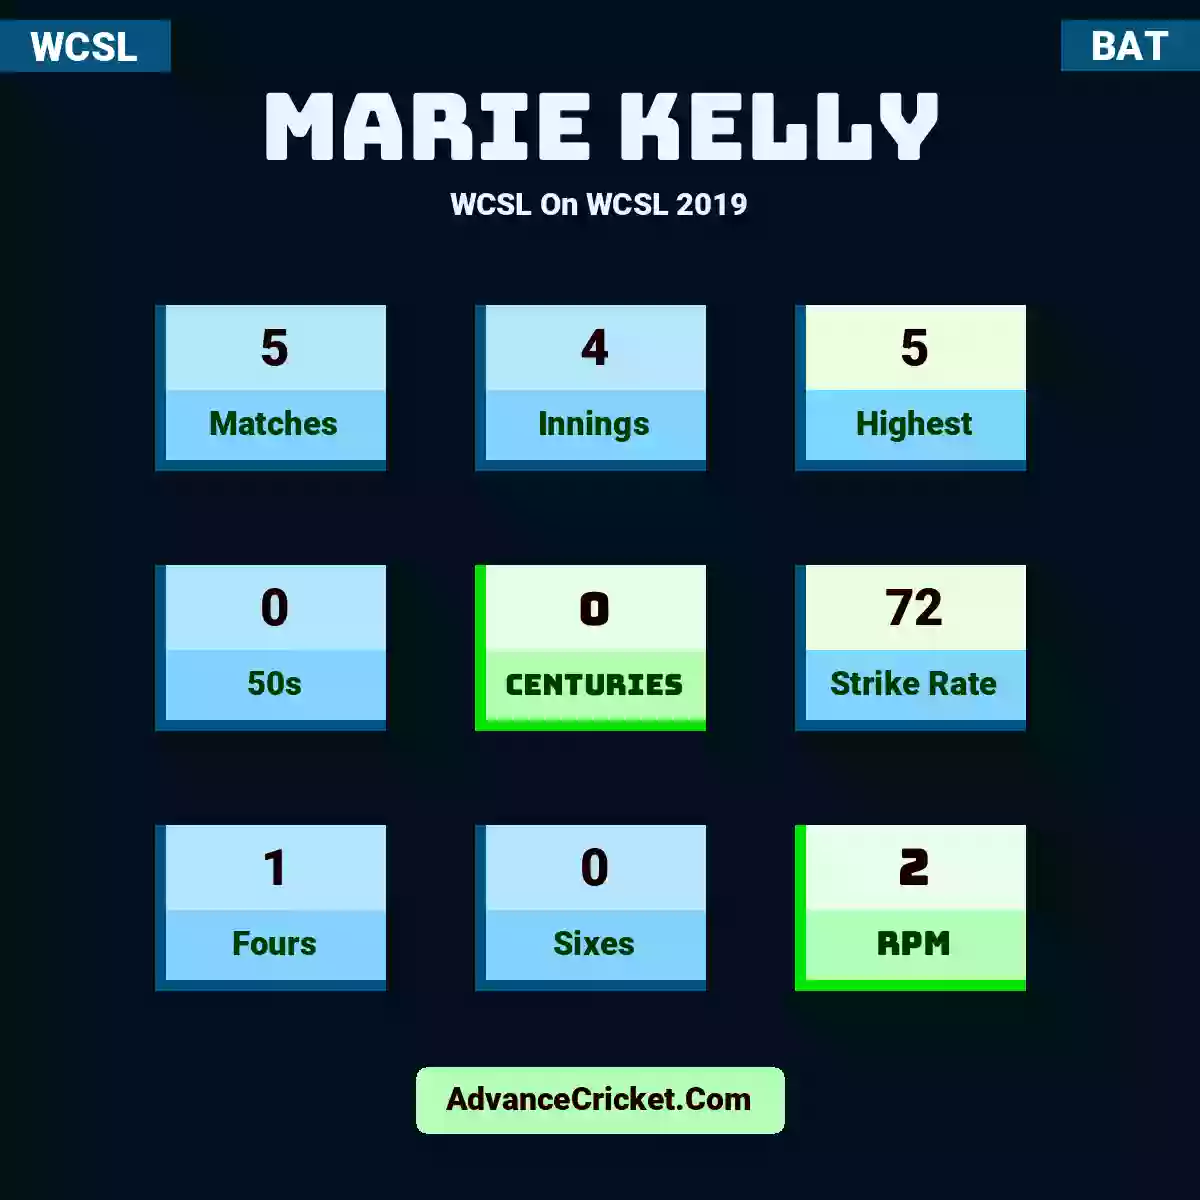 Marie Kelly WCSL  On WCSL 2019, Marie Kelly played 5 matches, scored 5 runs as highest, 0 half-centuries, and 0 centuries, with a strike rate of 72. M.Kelly hit 1 fours and 0 sixes, with an RPM of 2.